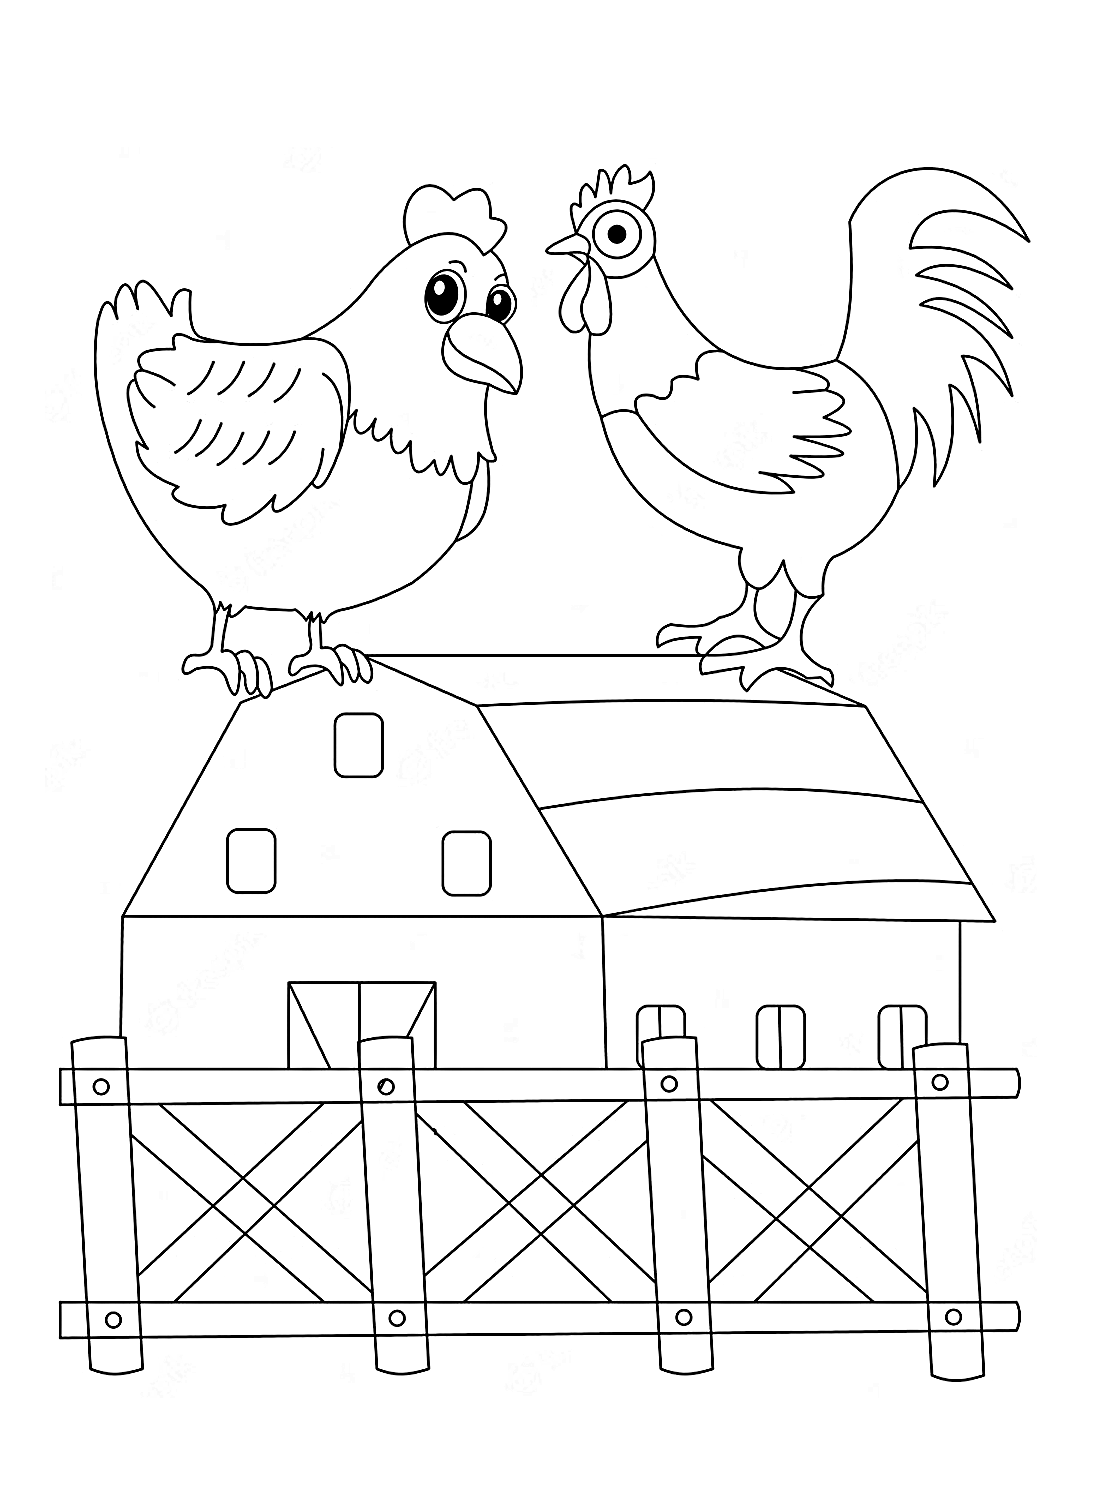 A hen and a rooster Coloring Pages